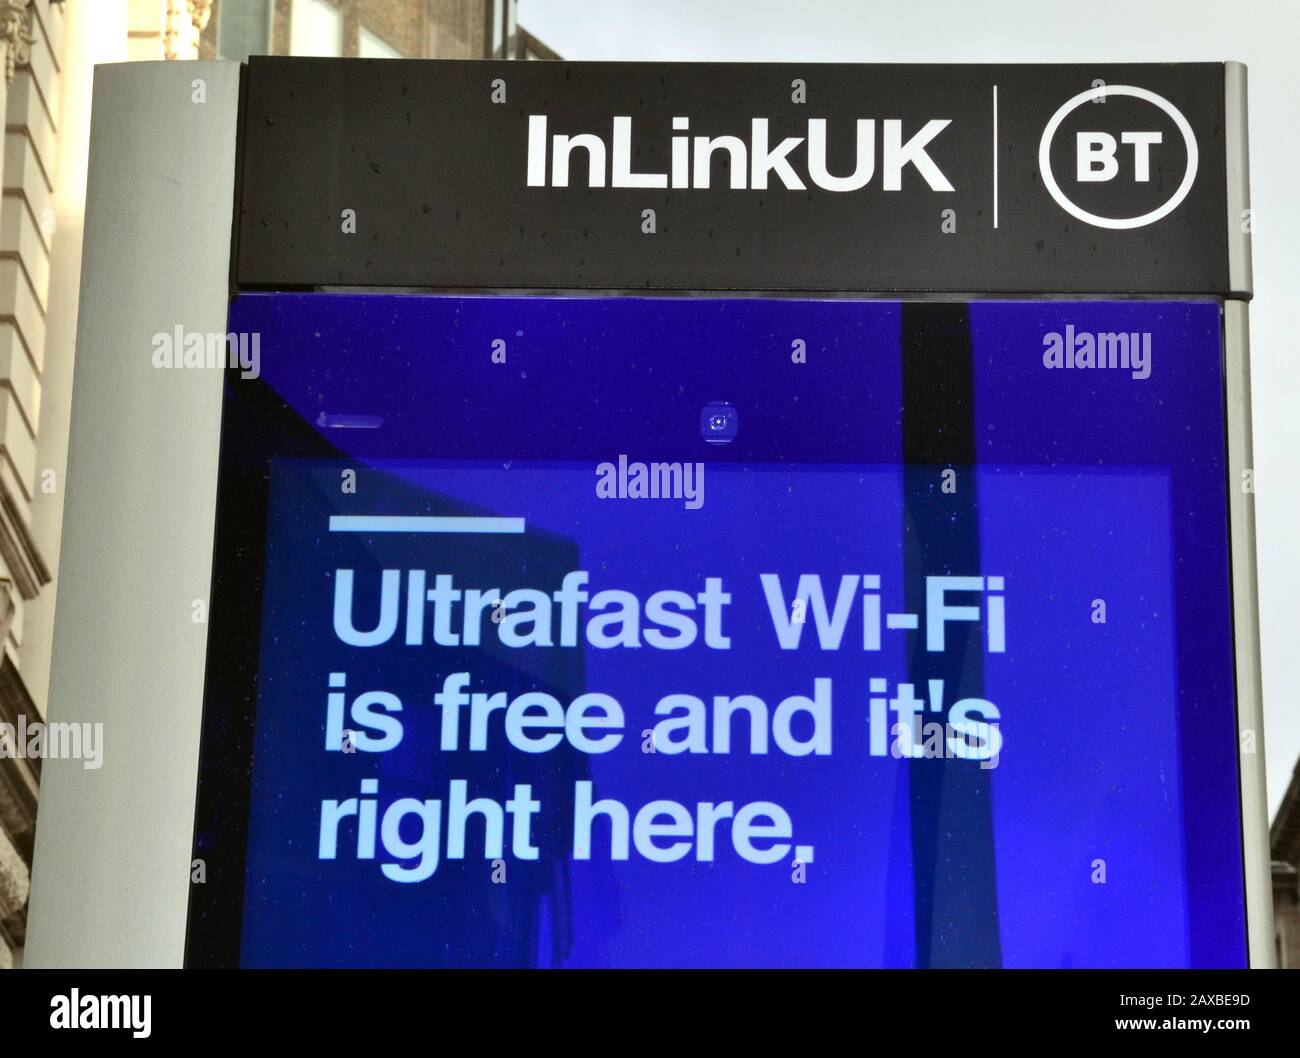 A BT InLinkUK point in Manchester, uk, providing free public Wi-Fi, phone calls, device charging and a tablet for access to city services. Stock Photo